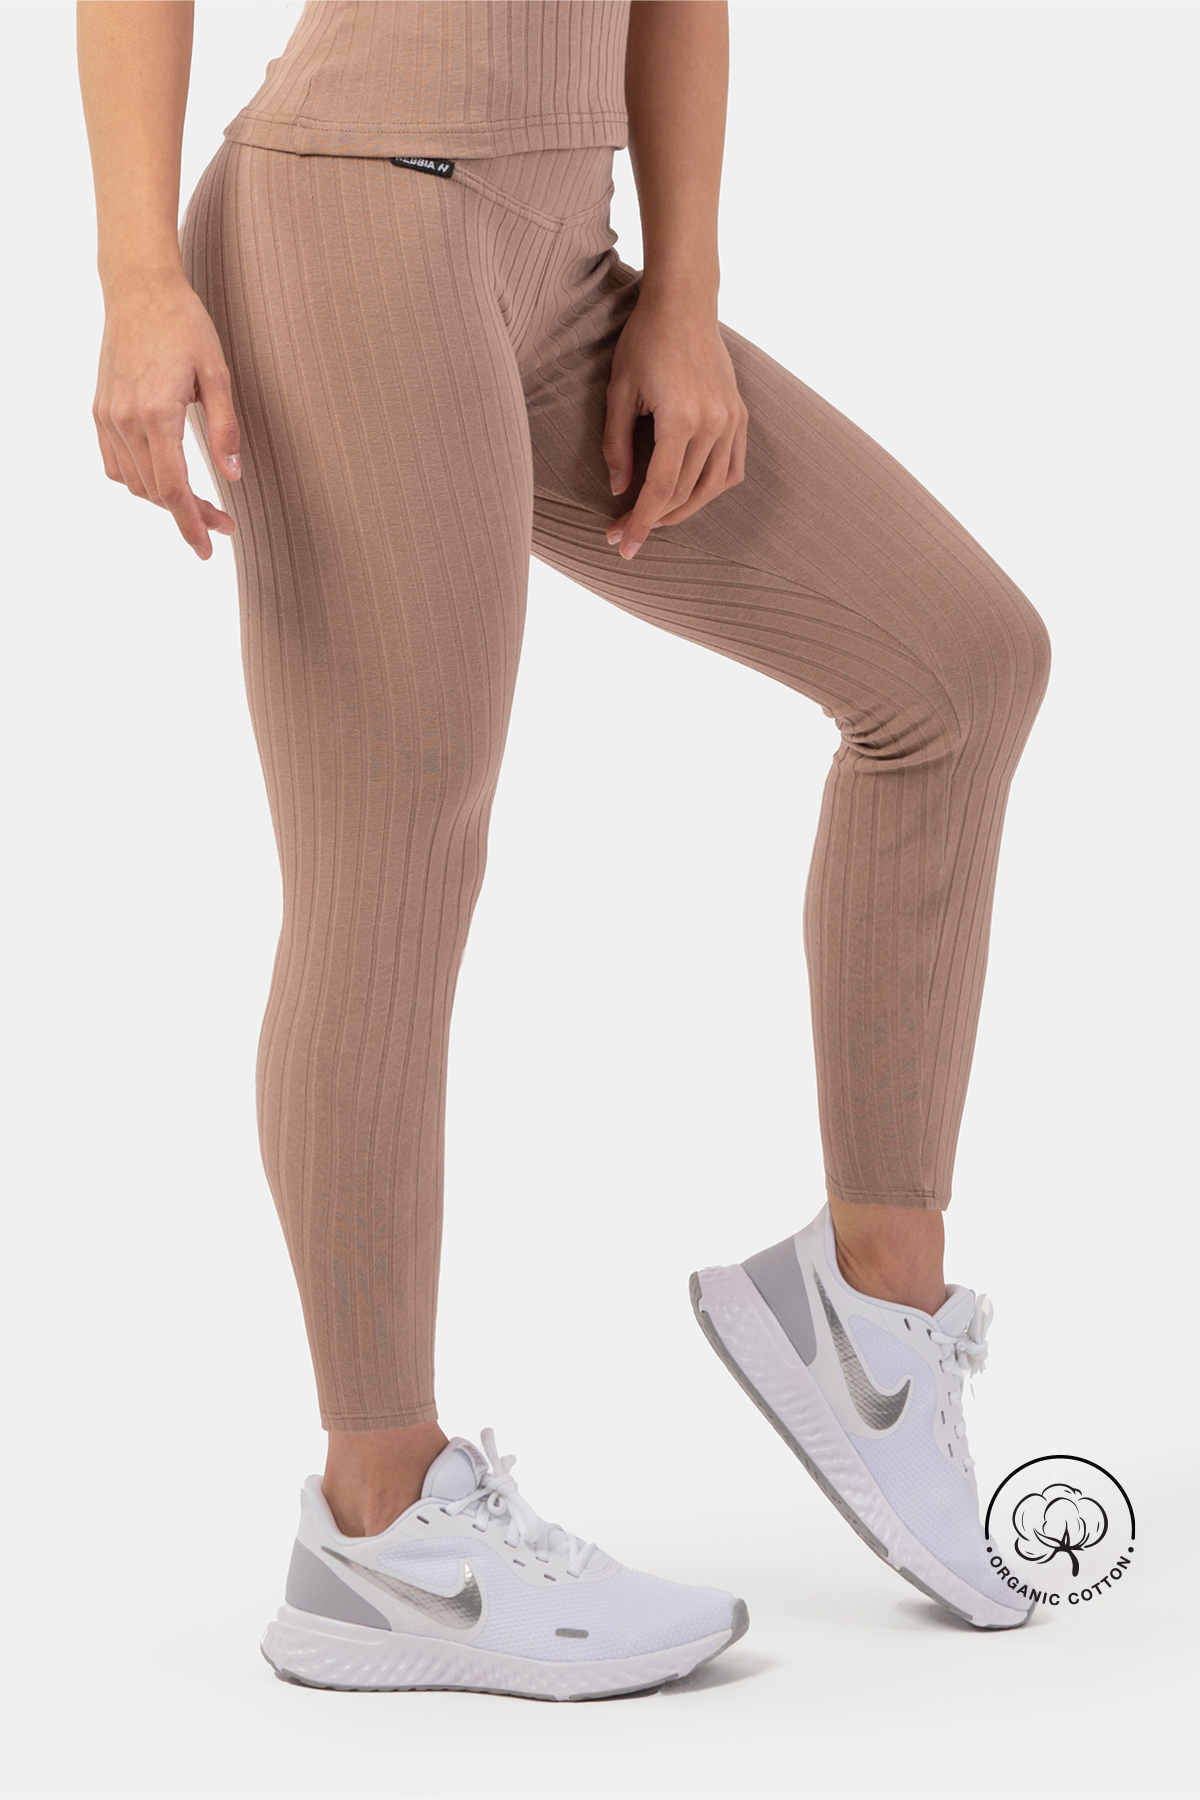 High Waist Ribbed Leggings - Apparel & Accessories - The Calm and Collected